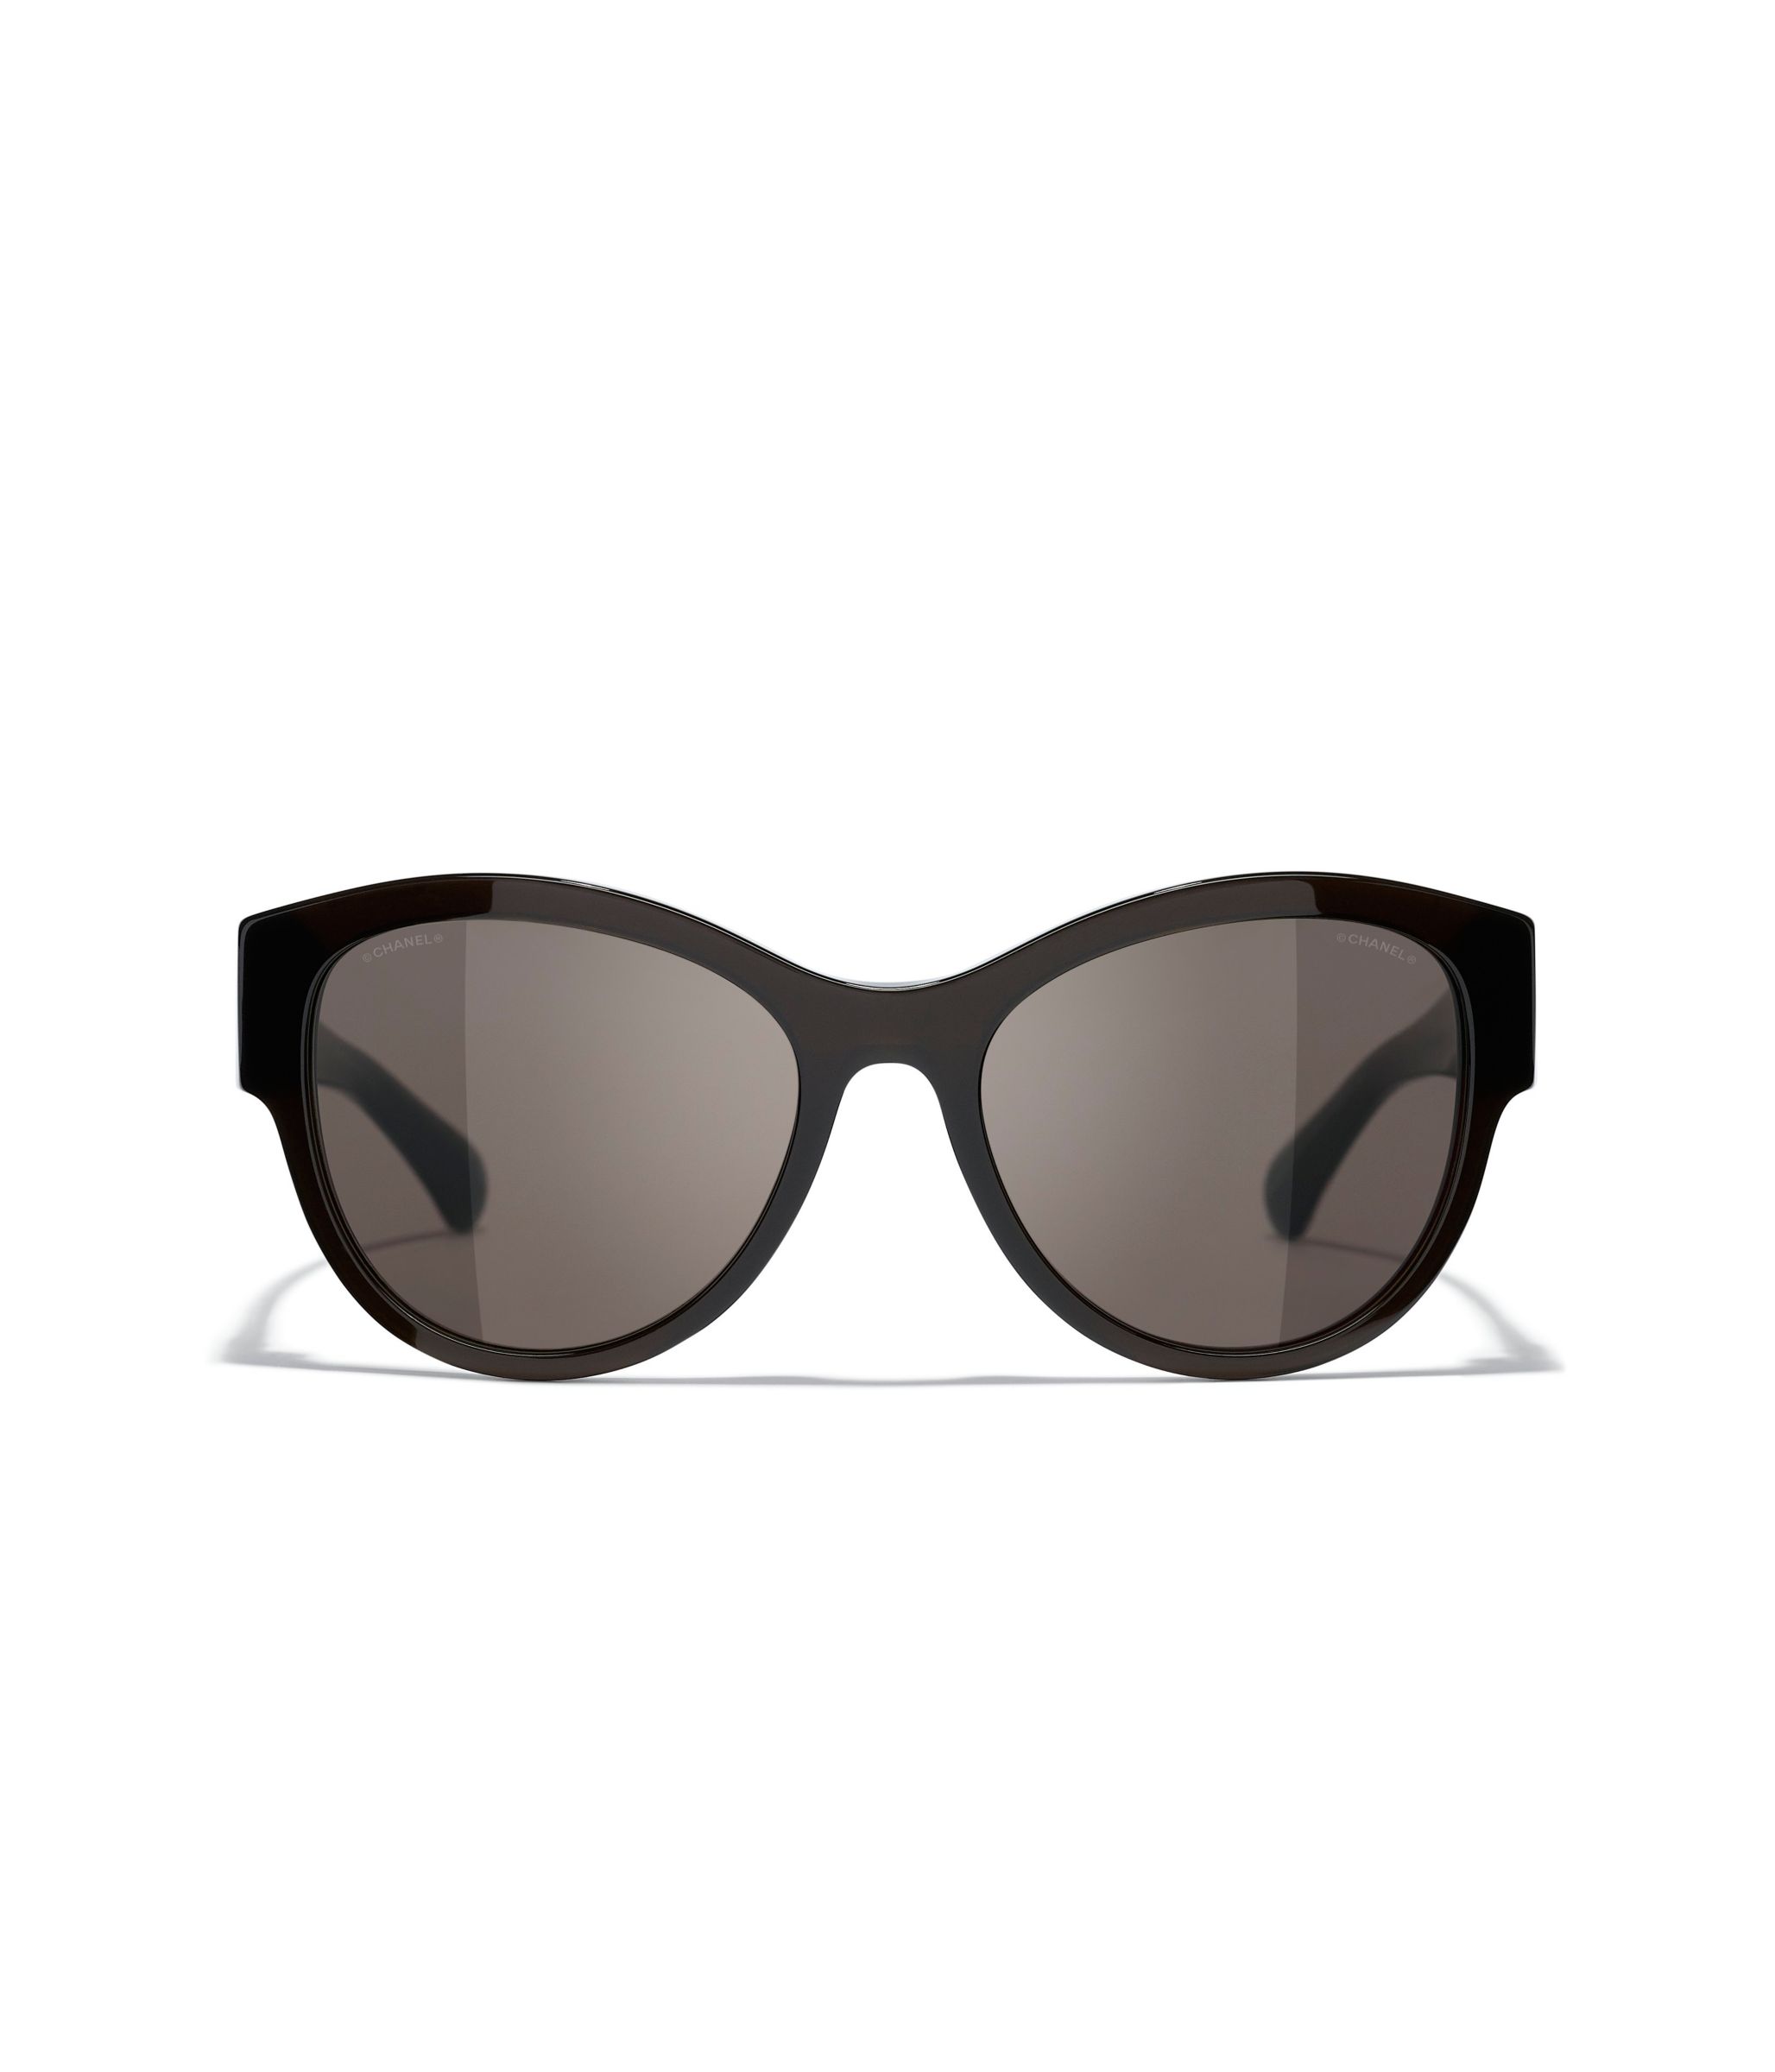 Chanel Oval Sunglasses CH5440 Black/Grey Gradient - ShopStyle